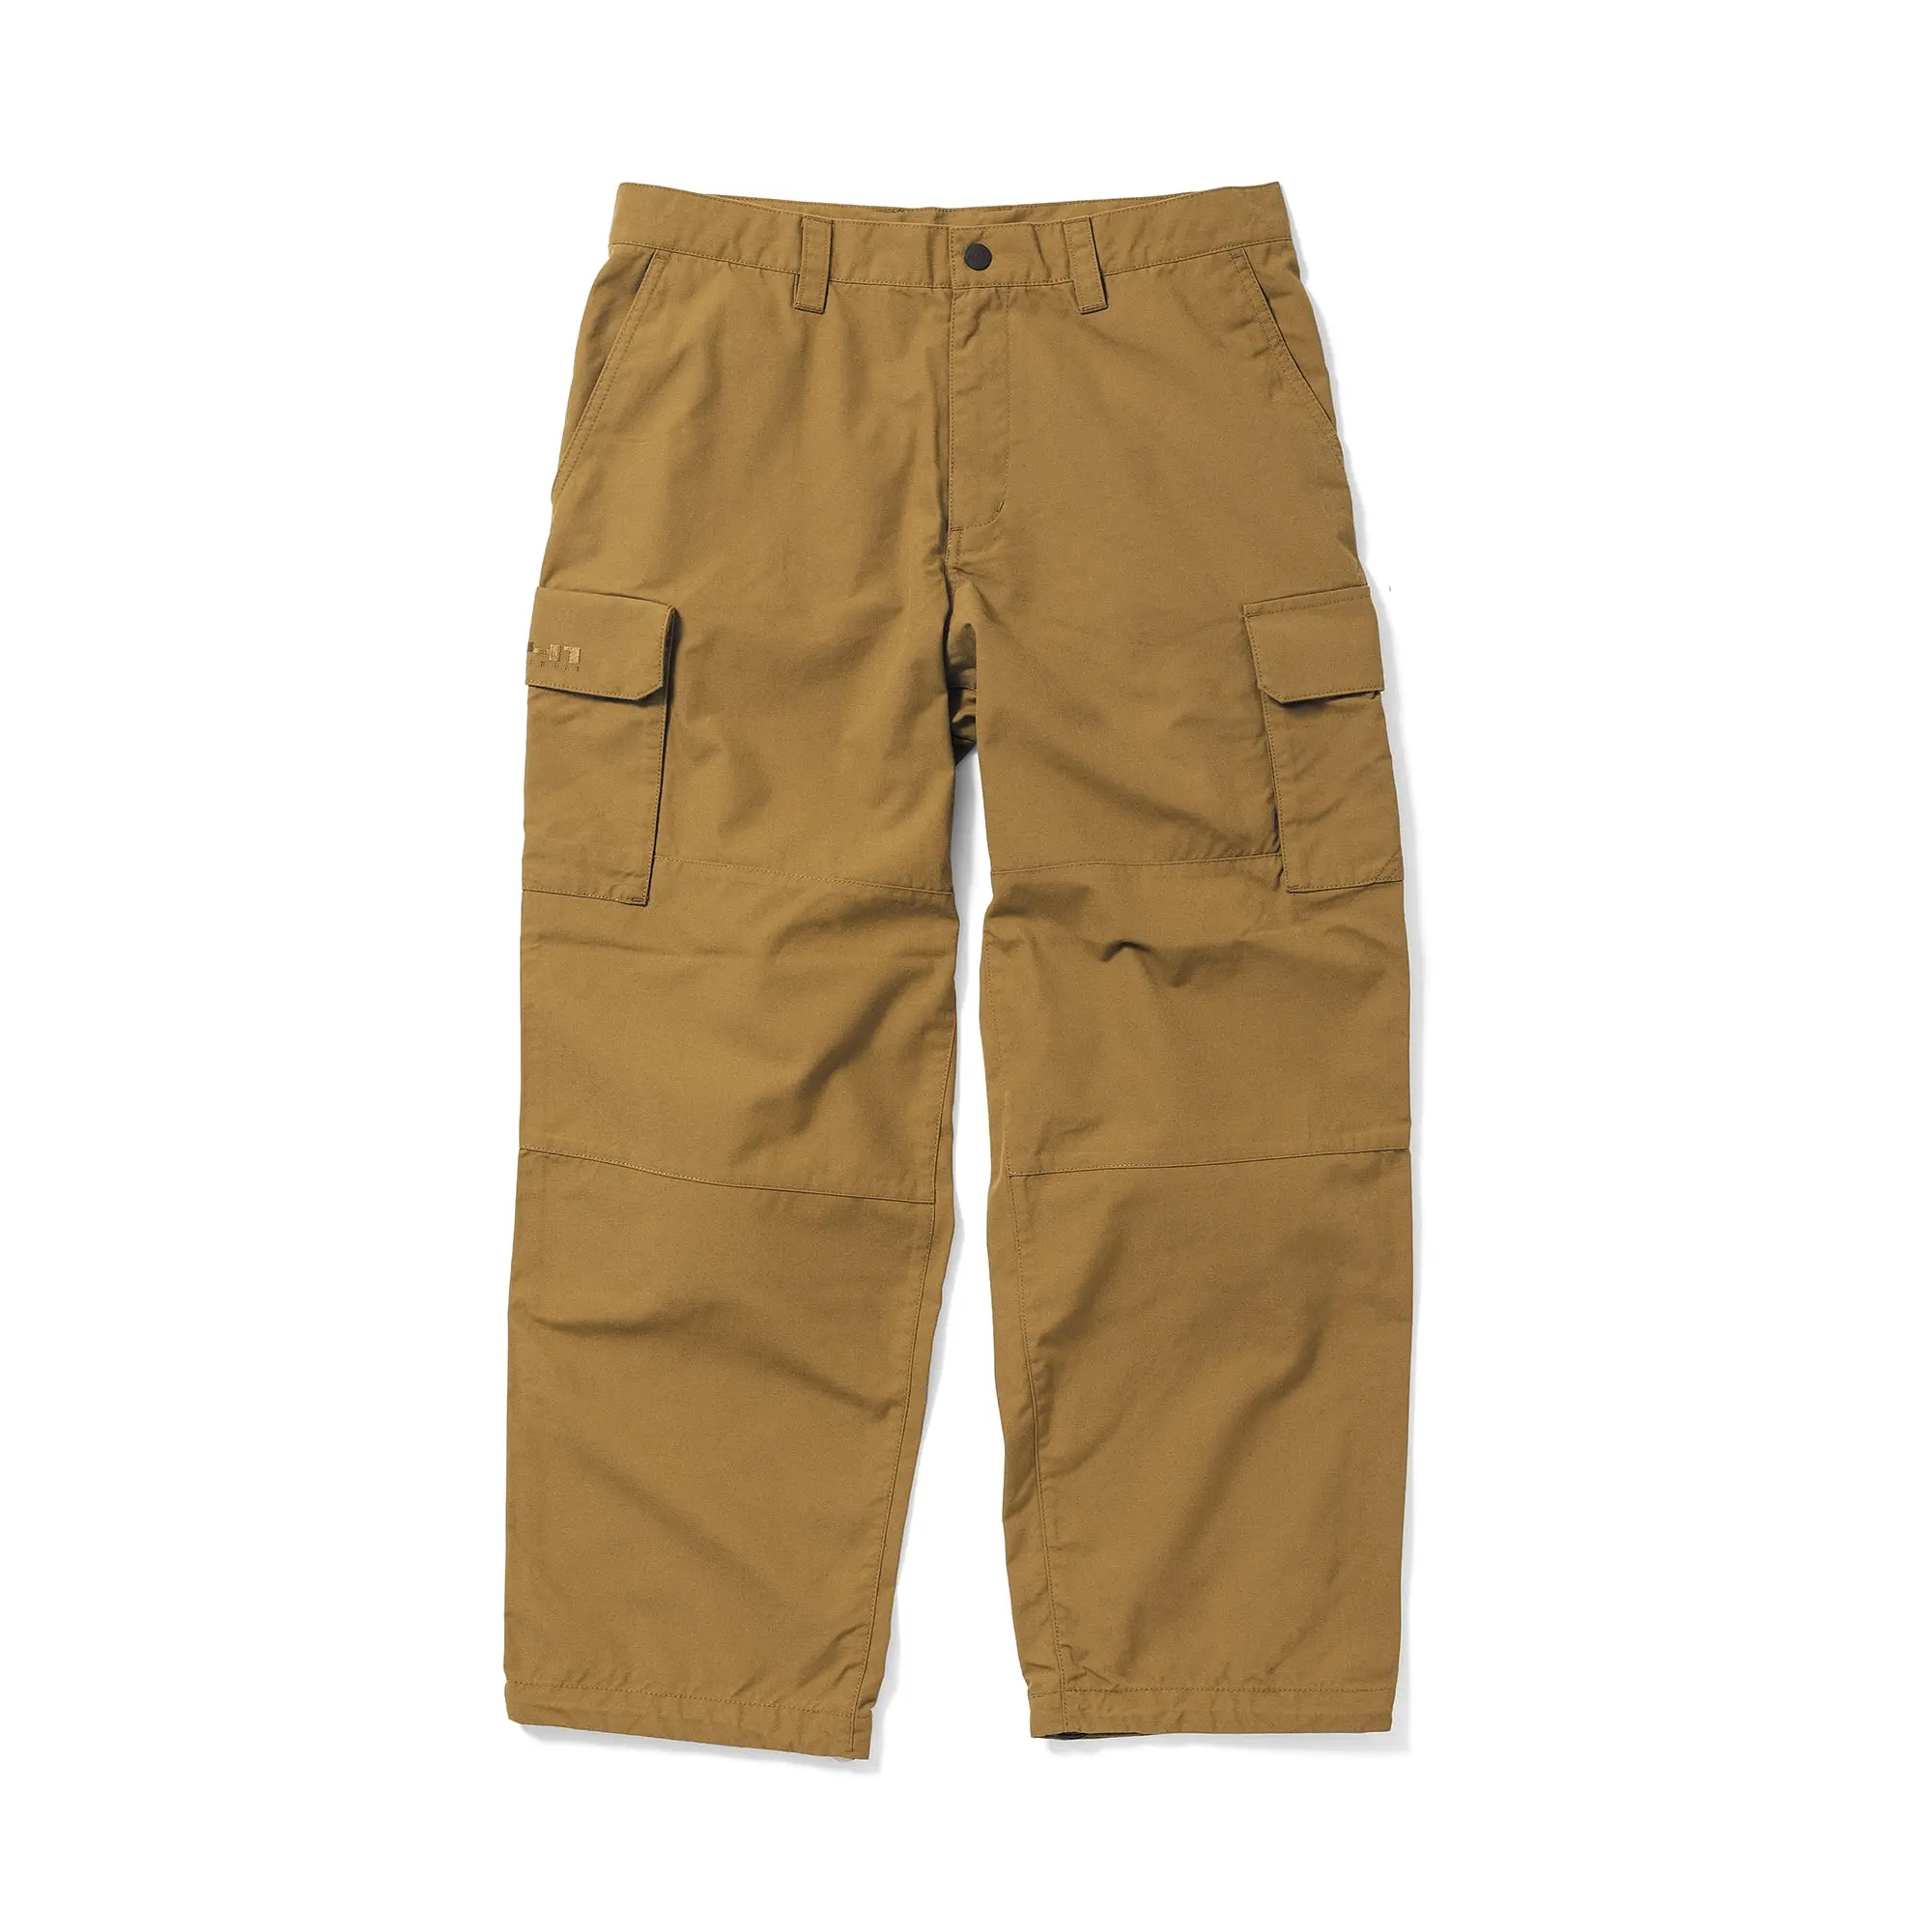 AREA241-CARGO PANTS
COLOR: OTTER
¥22,000（tax incl.） MB3351